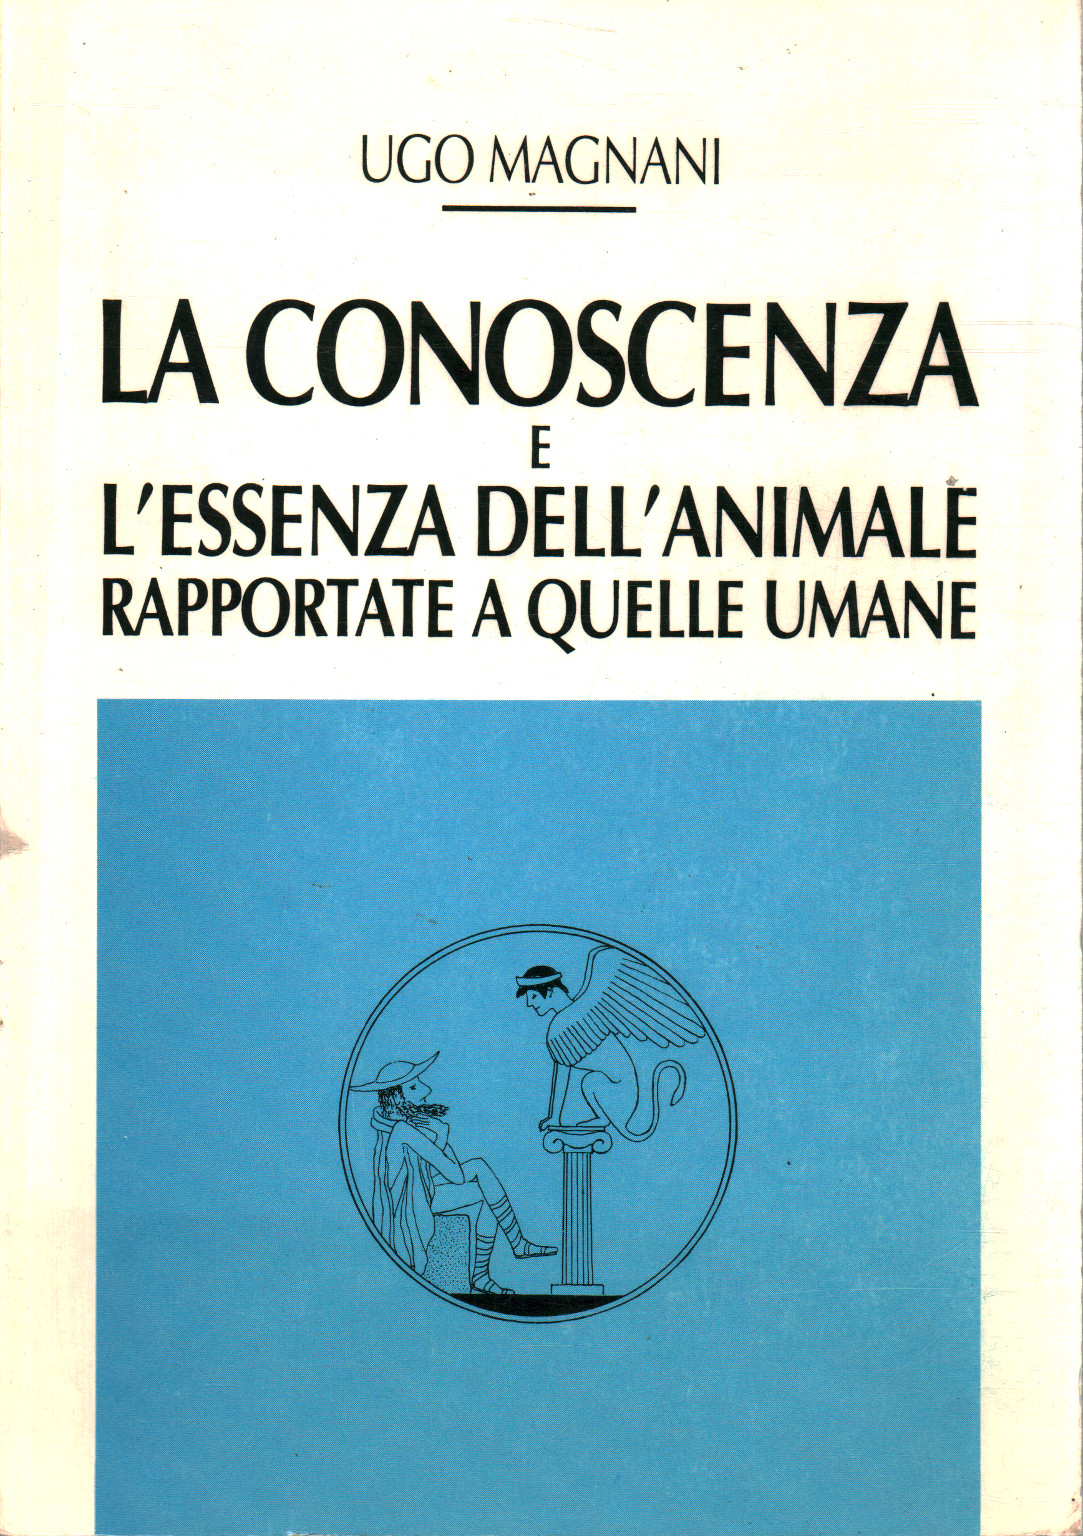 The knowledge and the essence of the animal related, Ugo Magnani